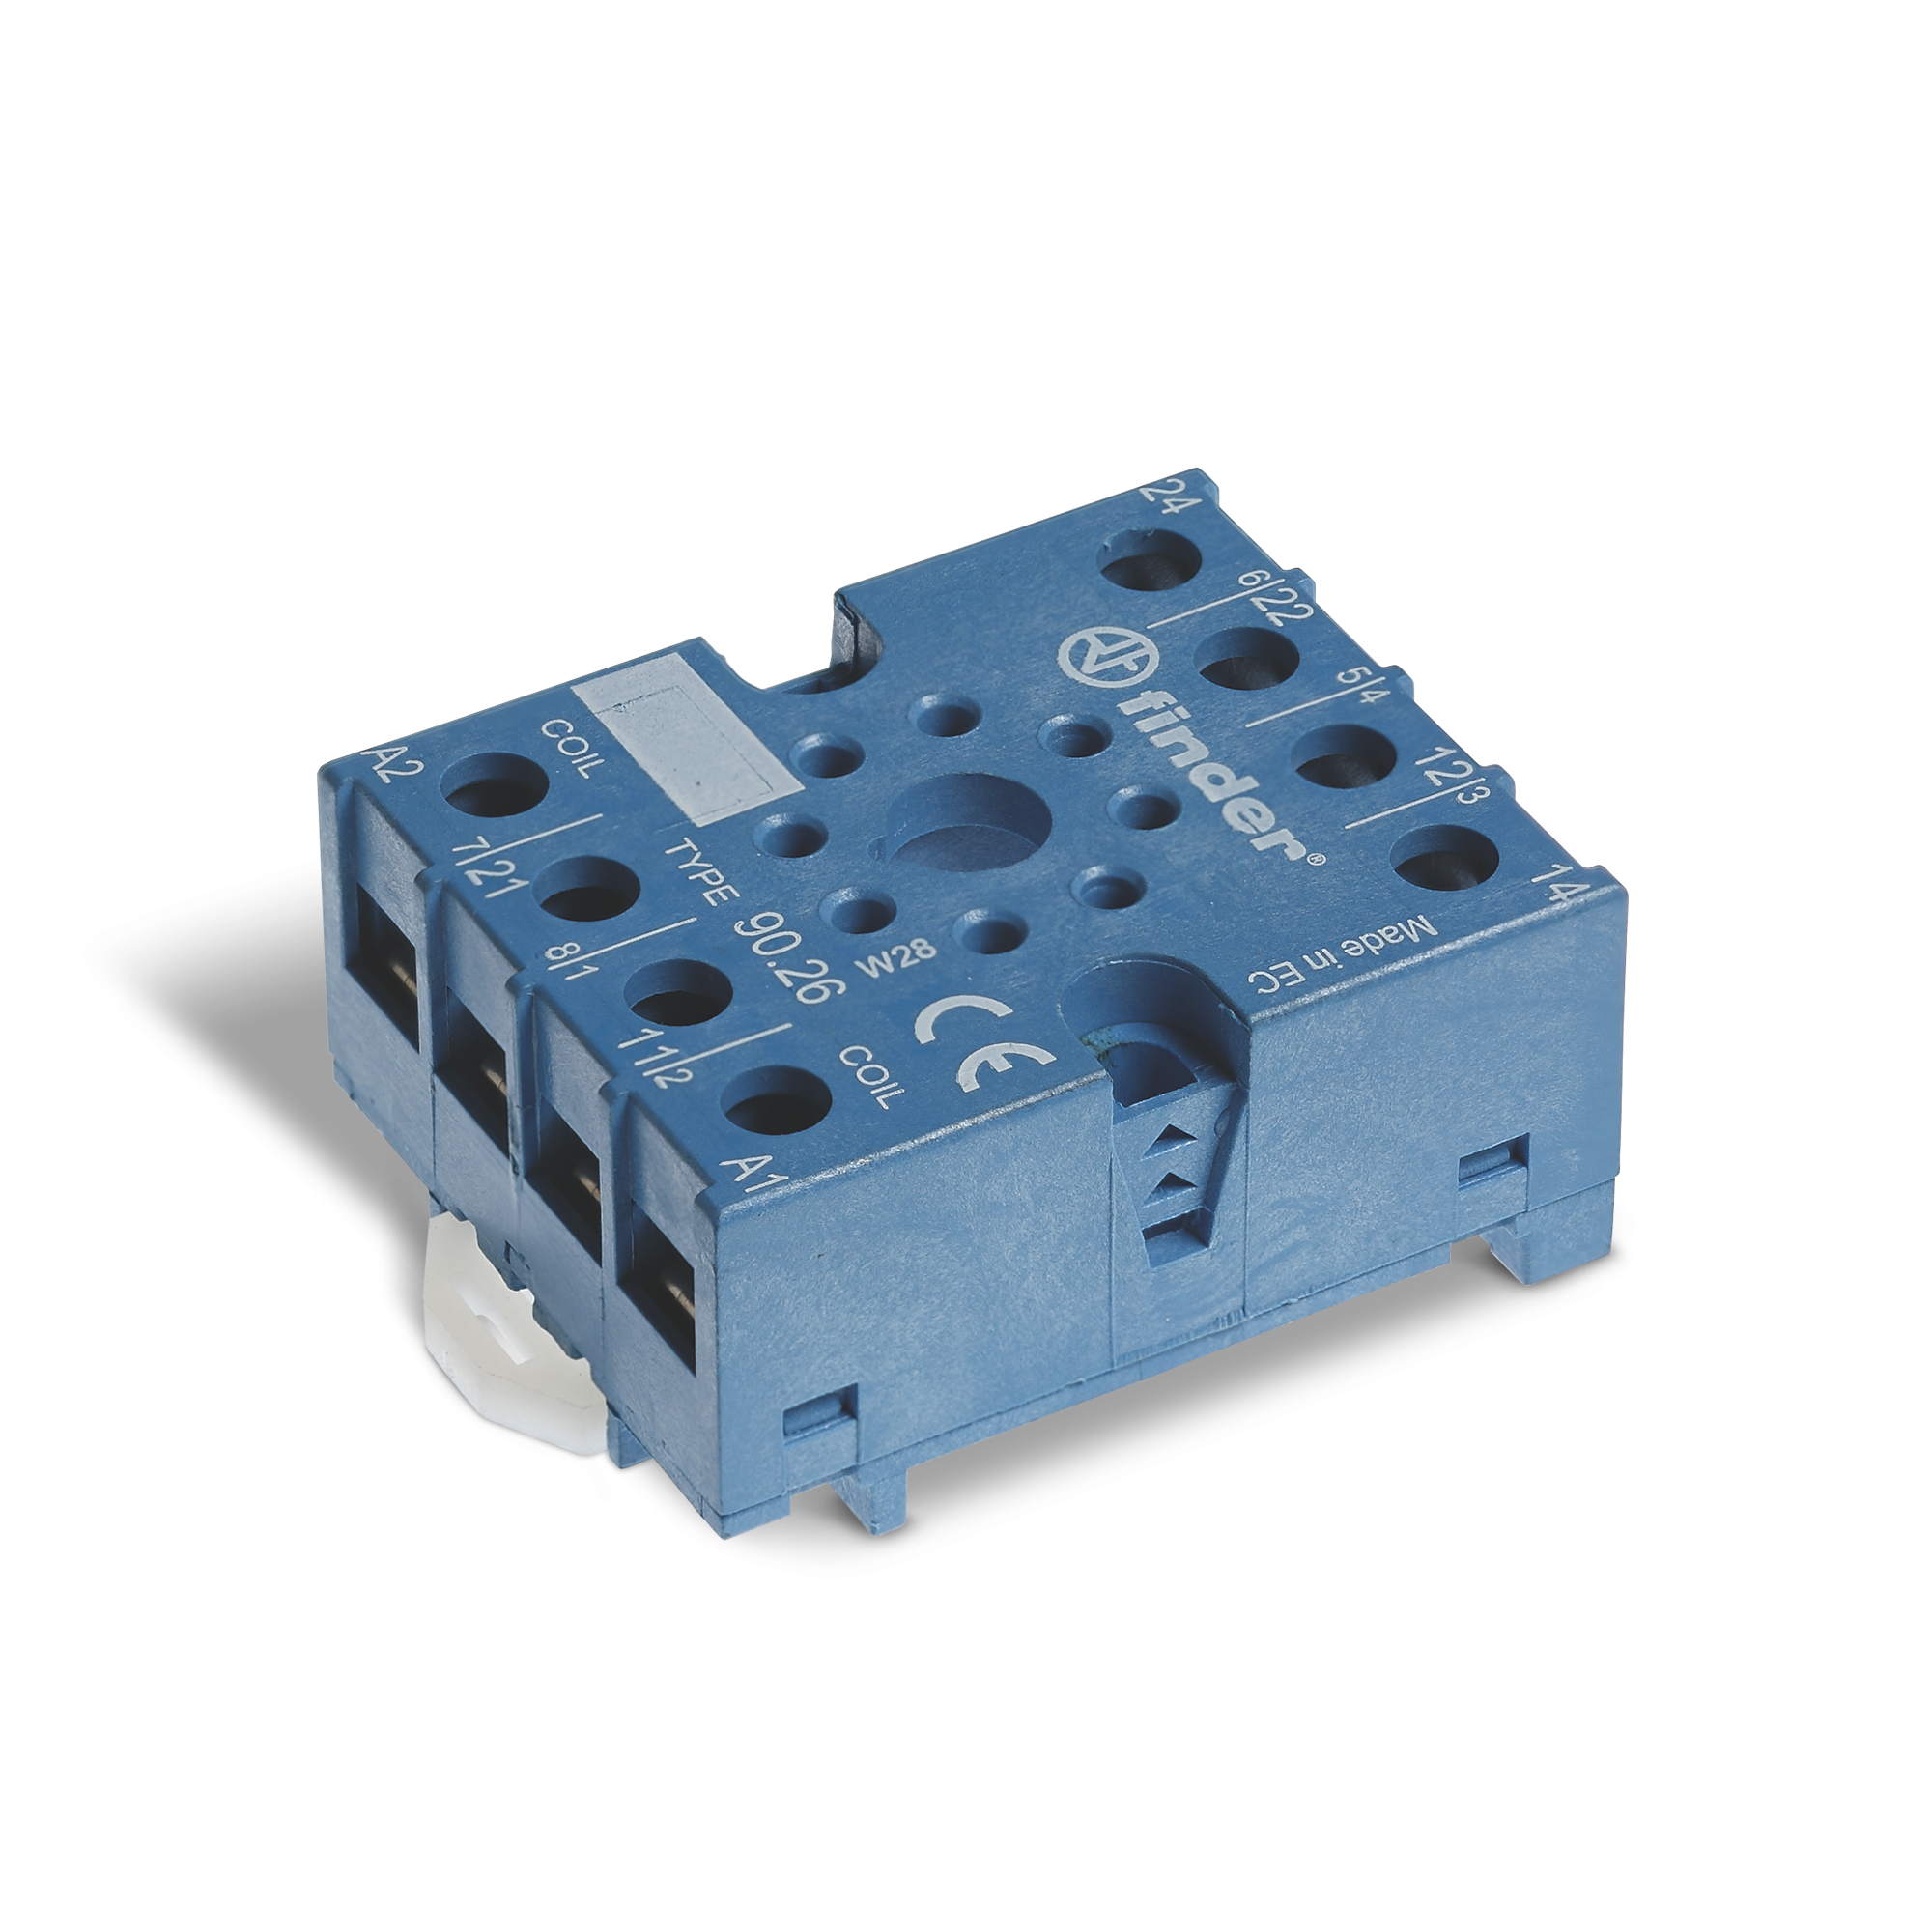 Relais finder Socket 90.112.3 10a 380vac NUOVO 